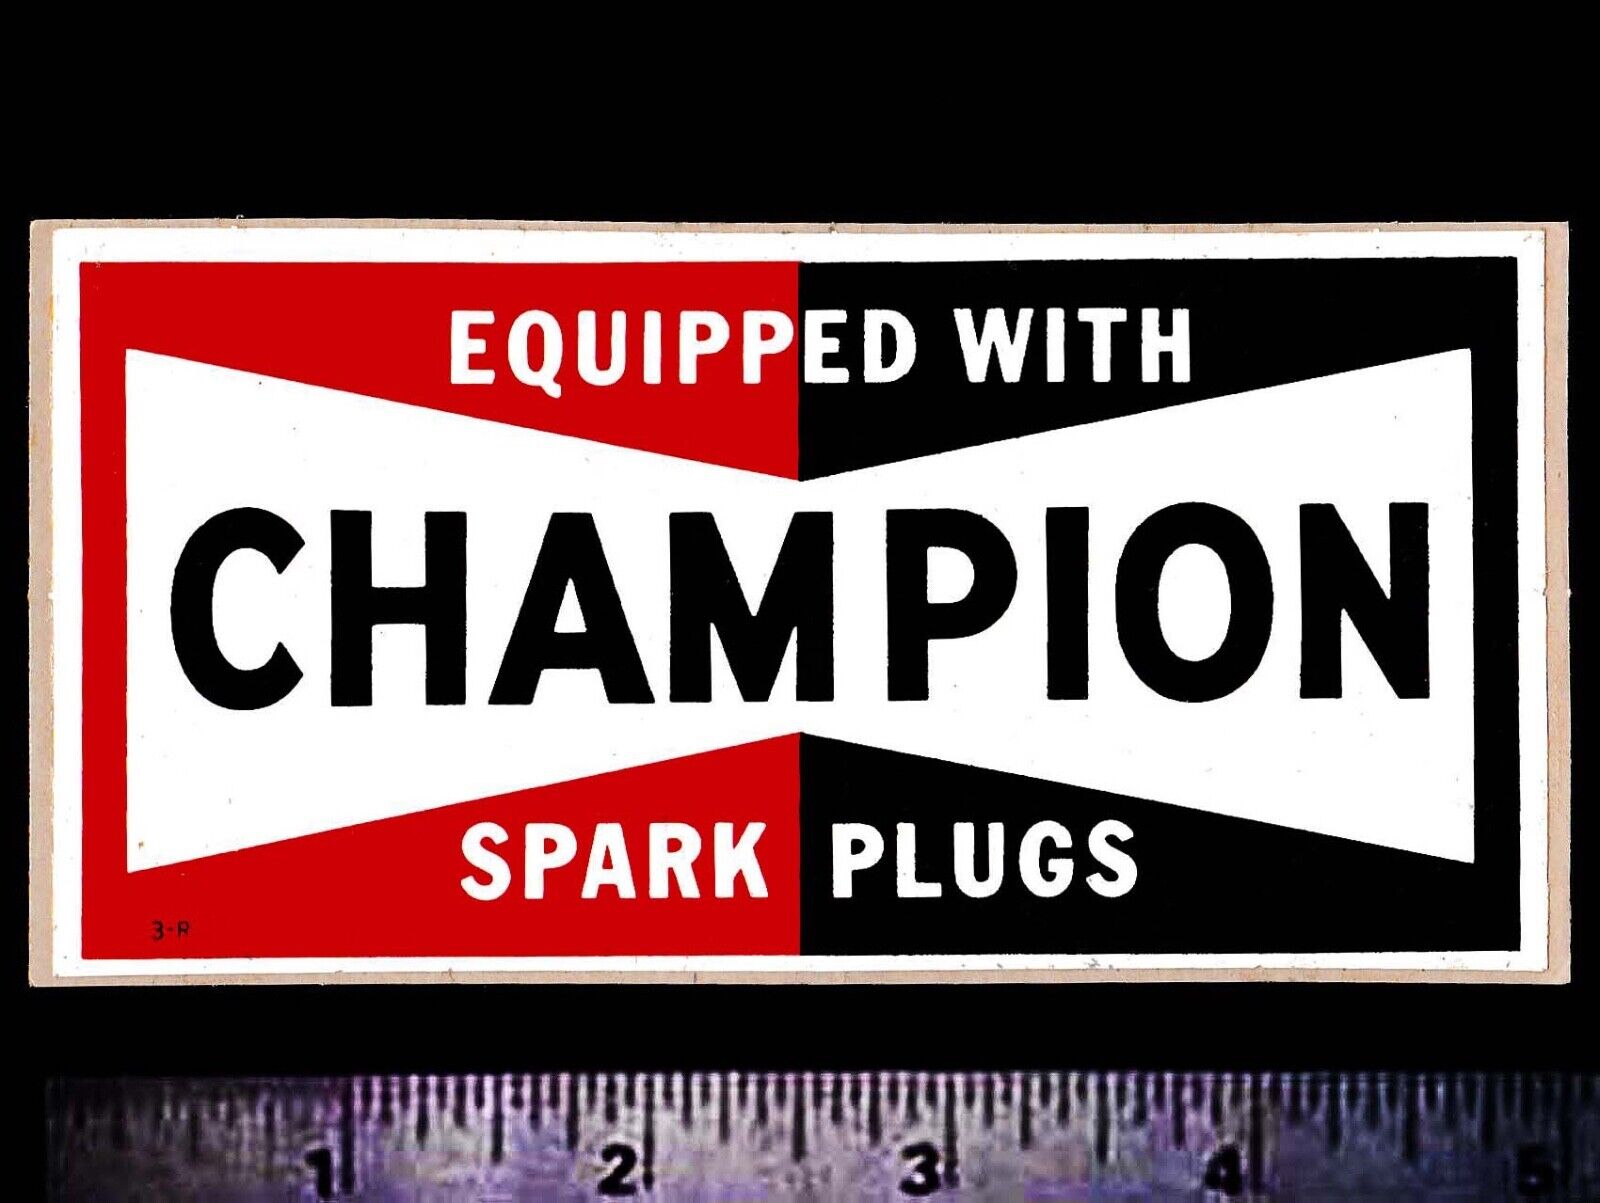 CHAMPION Equipped - Original Vintage 1960's 70's Racing Decal/Sticker - 5 inch